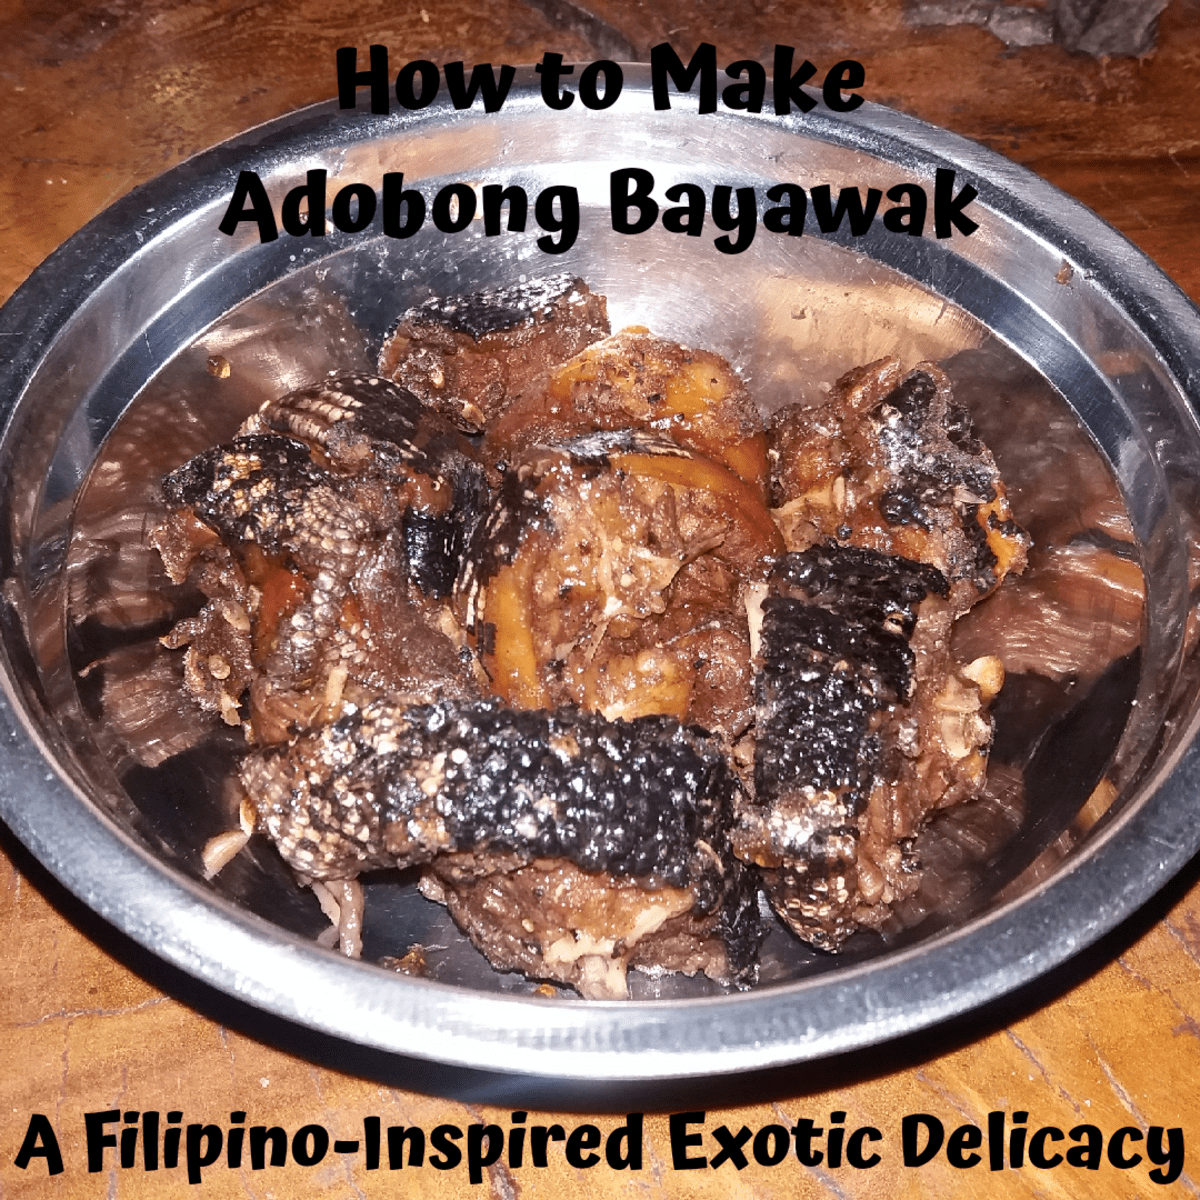 how-to-make-adobong-bayawak-a-filipino-inspired-exotic-delicacy.png